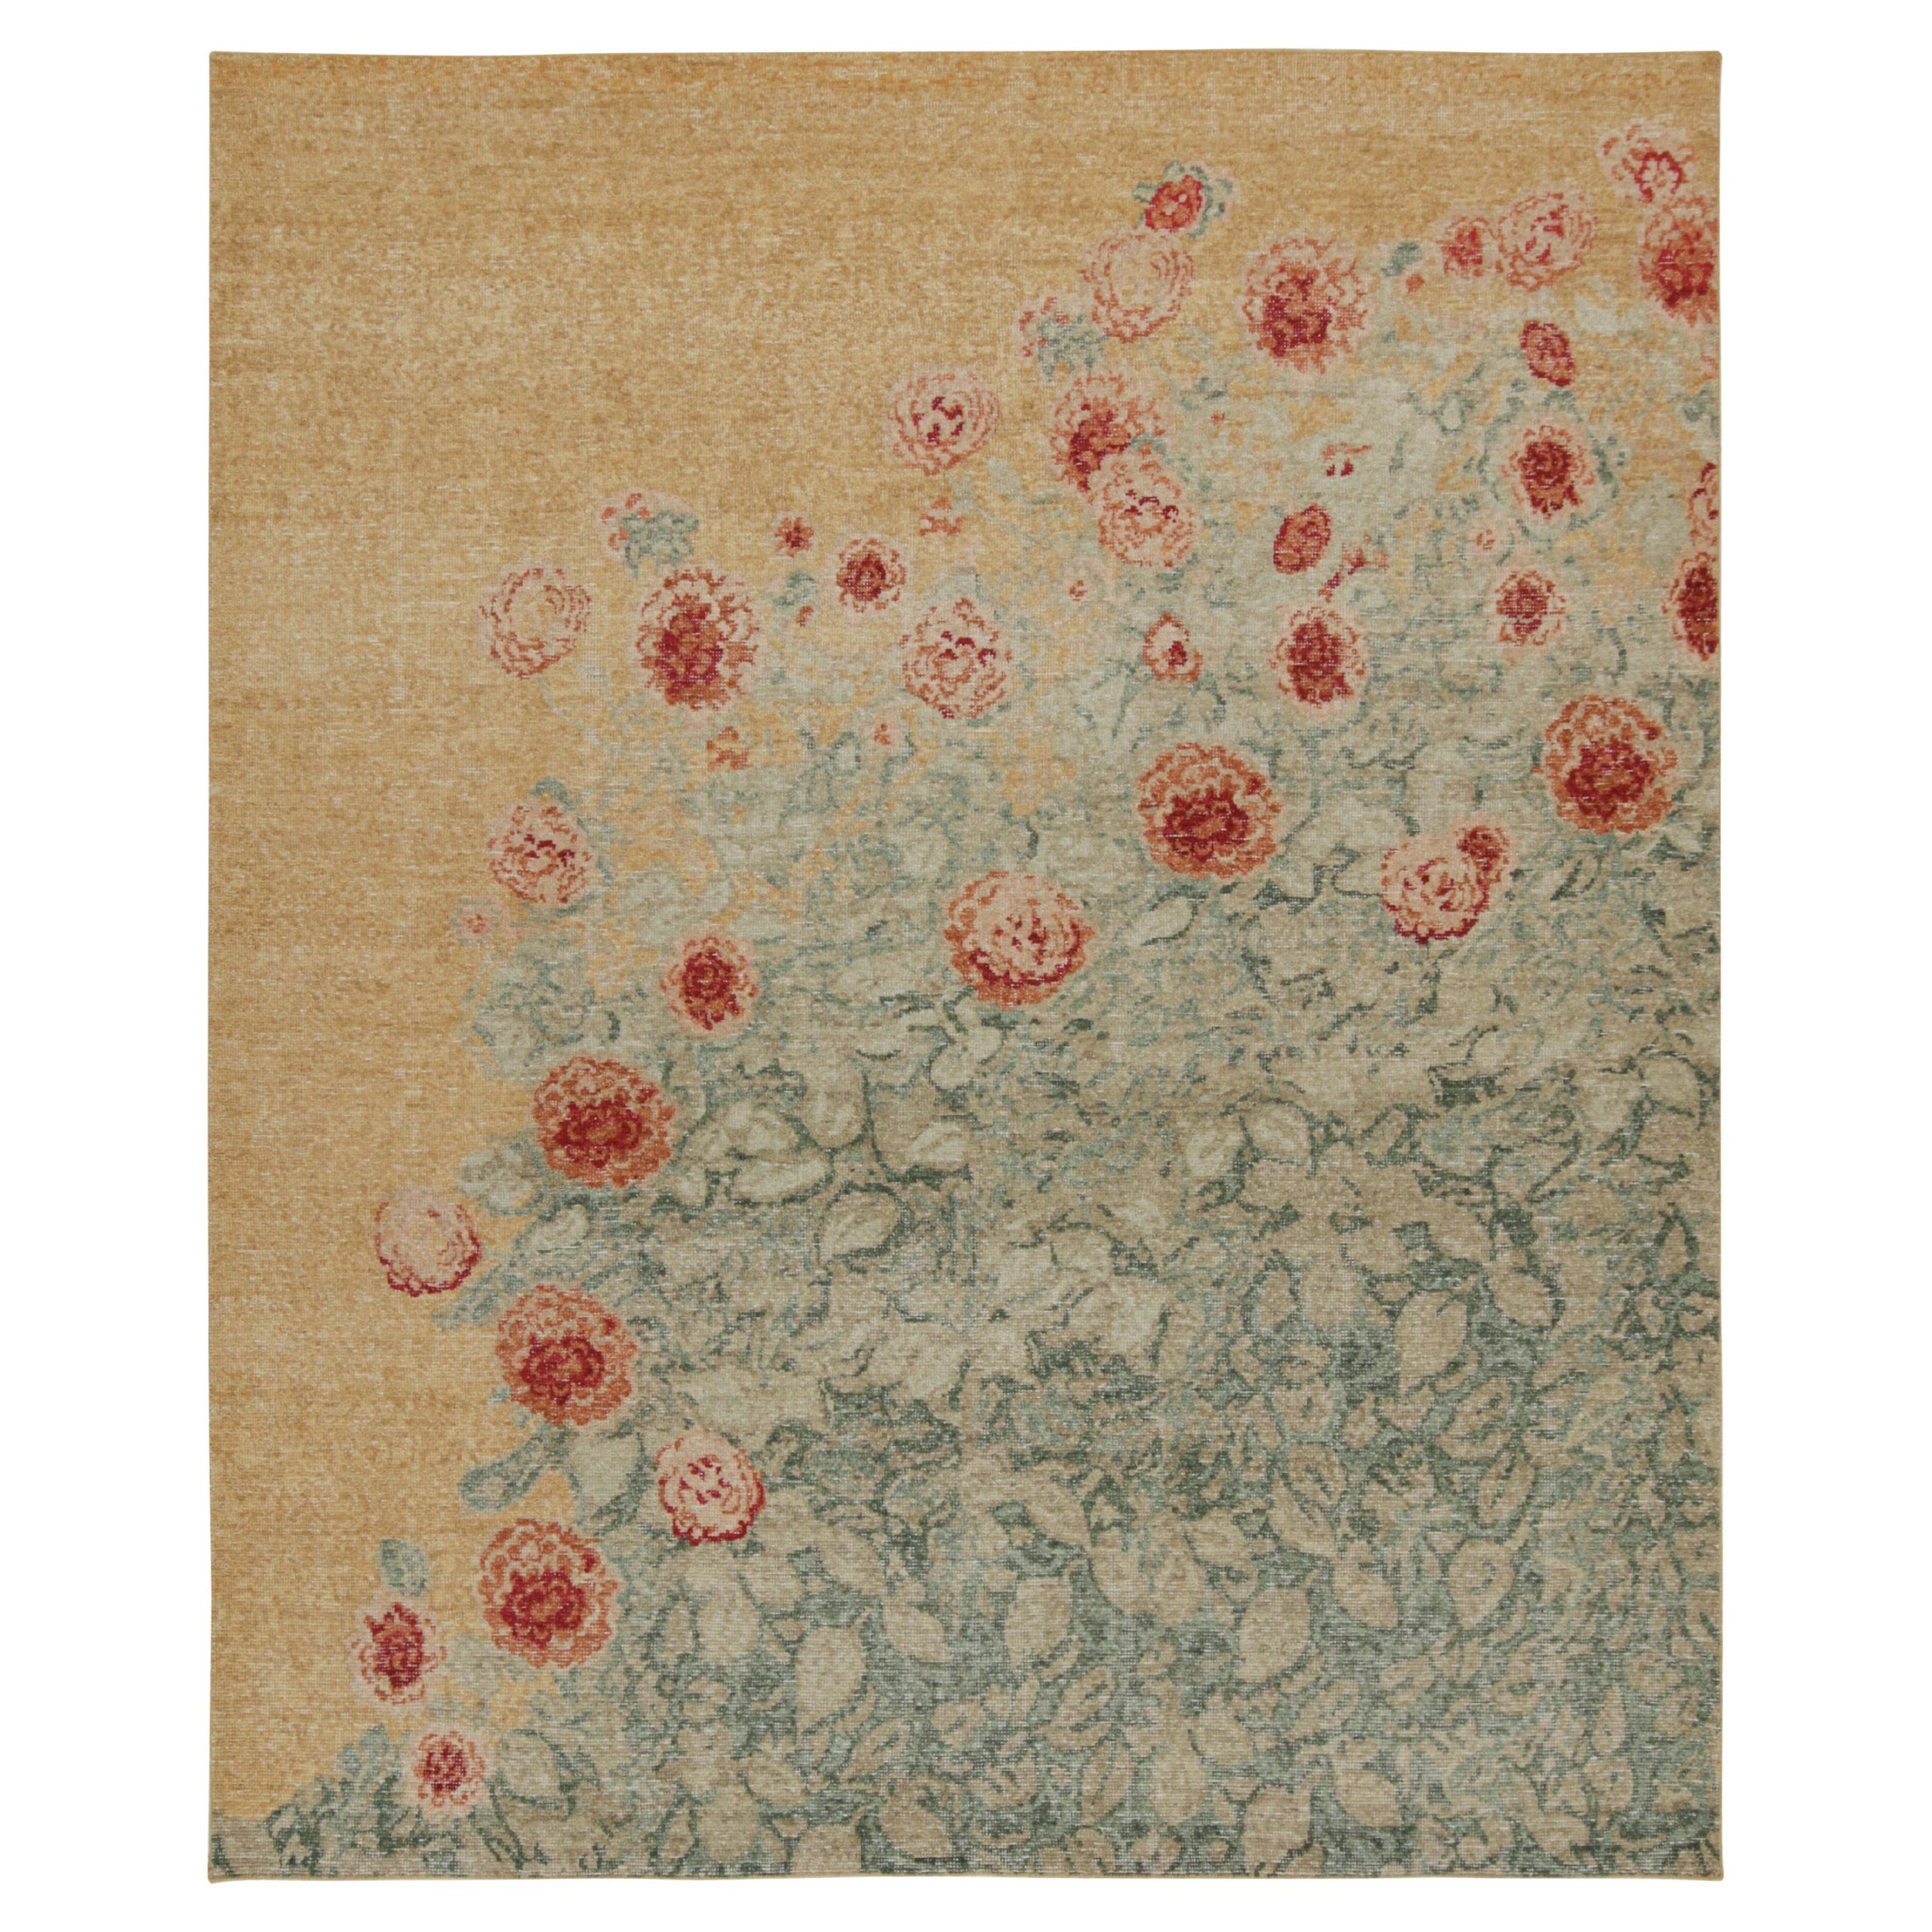 Rug & Kilim's Distressed style Transitional rug in Polychromatic Floral Patterns (Tapis transitionnel de style vieilli aux motifs floraux polychromes)